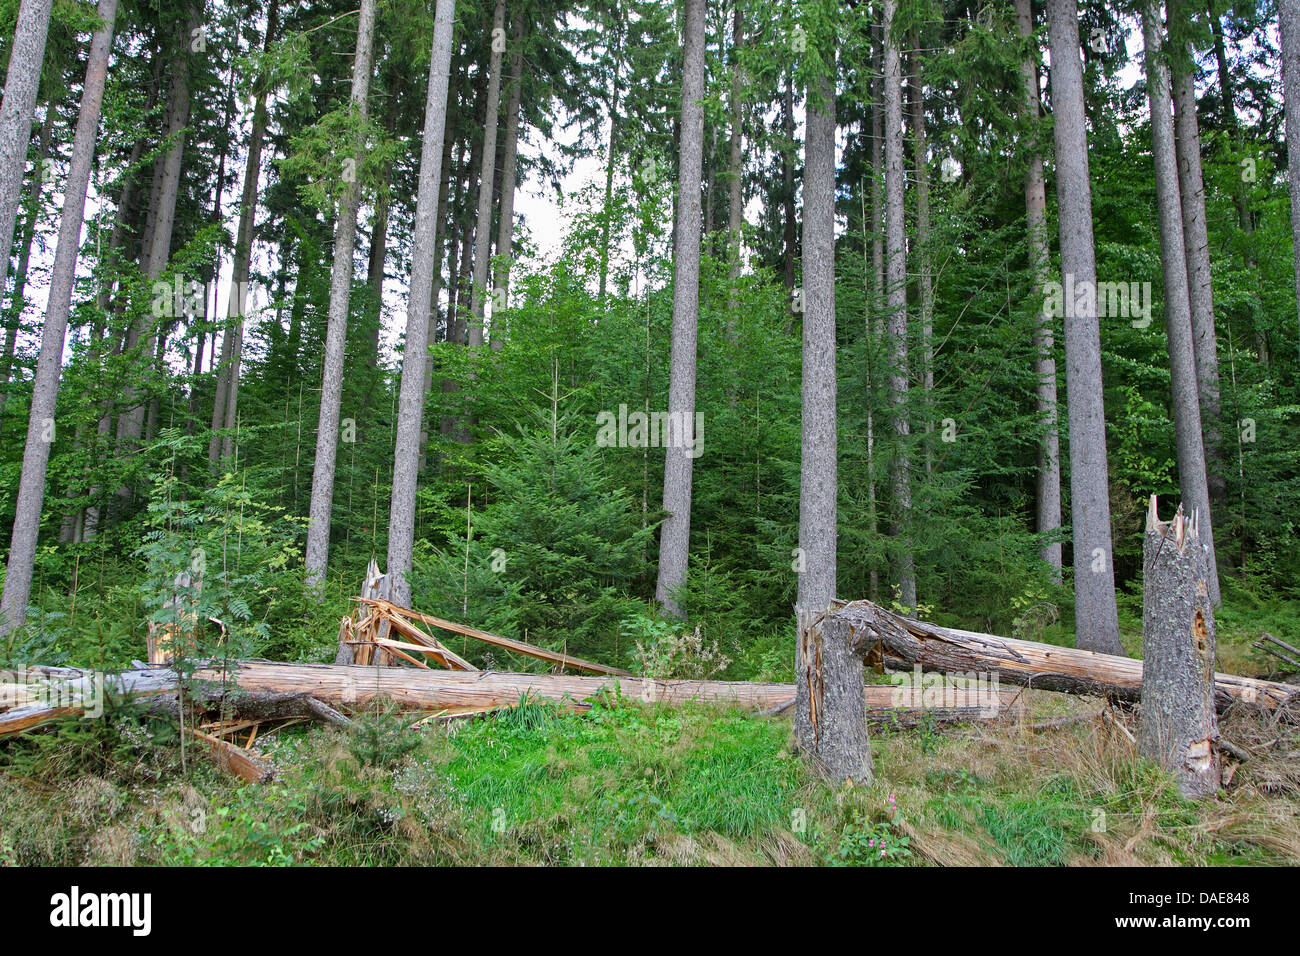 Norway spruce (Picea abies), windbreak in a spruce forest, Germany, Bavaria, Bavarian Forest National Park Stock Photo